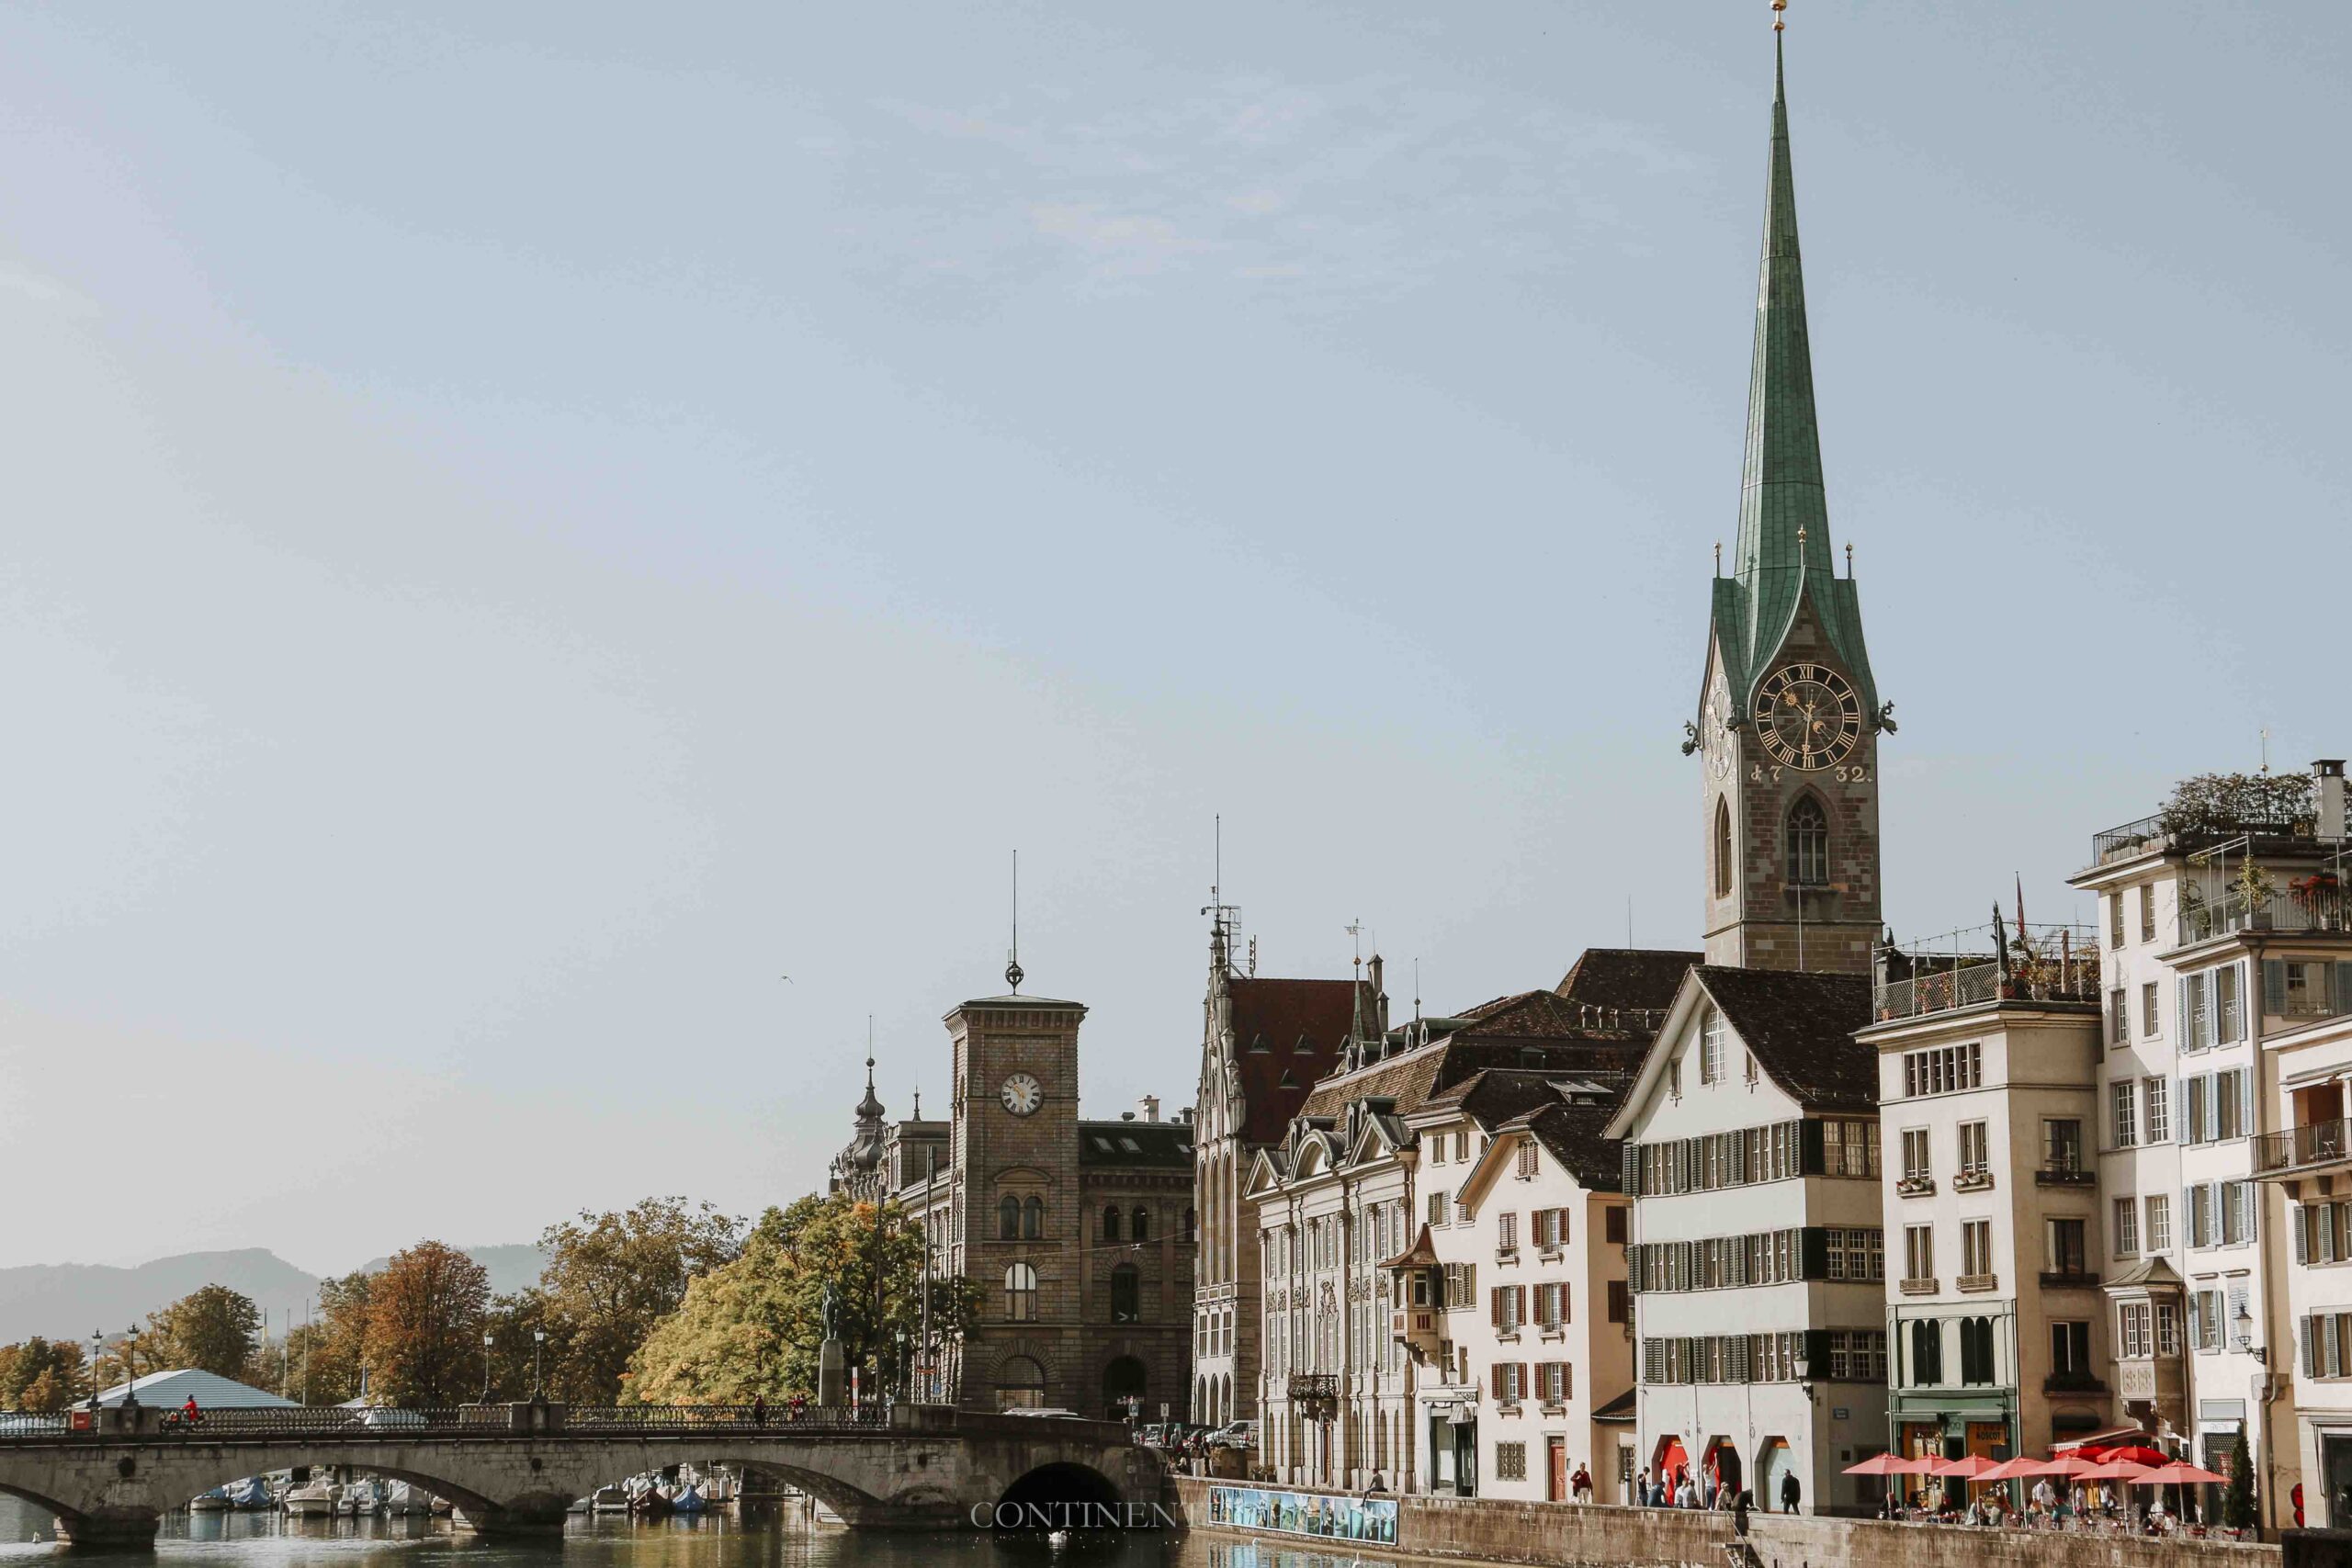 The cityscape of zurich on a 2 week Switzerland itinerary by train